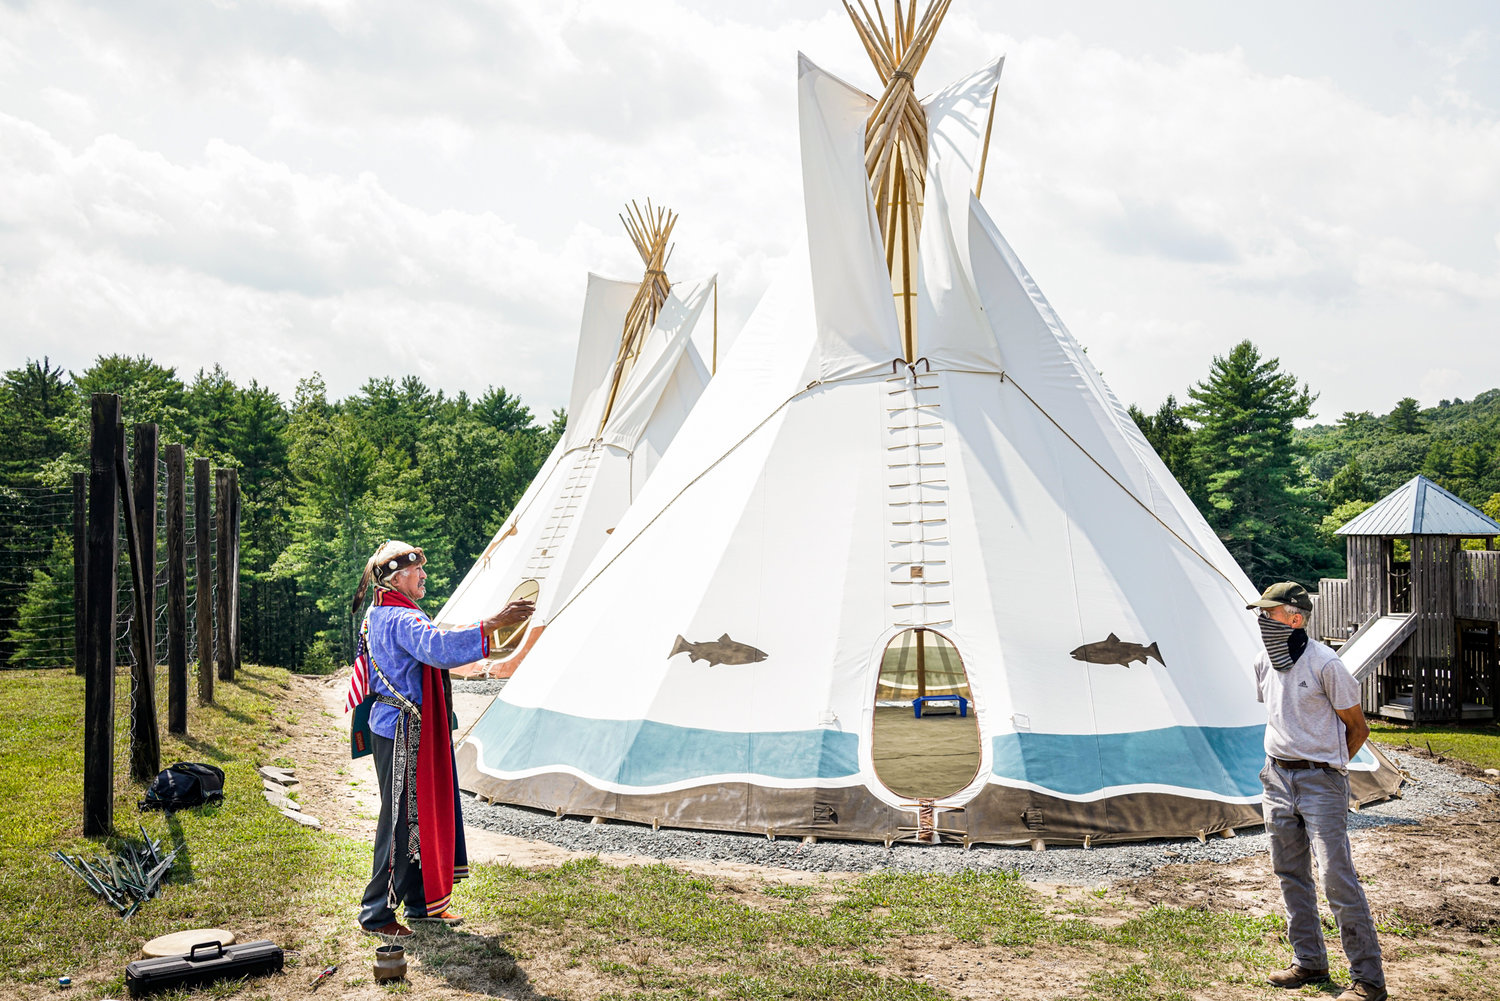 Navajo elder Jake Singer, left, and Peter Comstock, Head of the Homestead School, in front of one of the tipis.